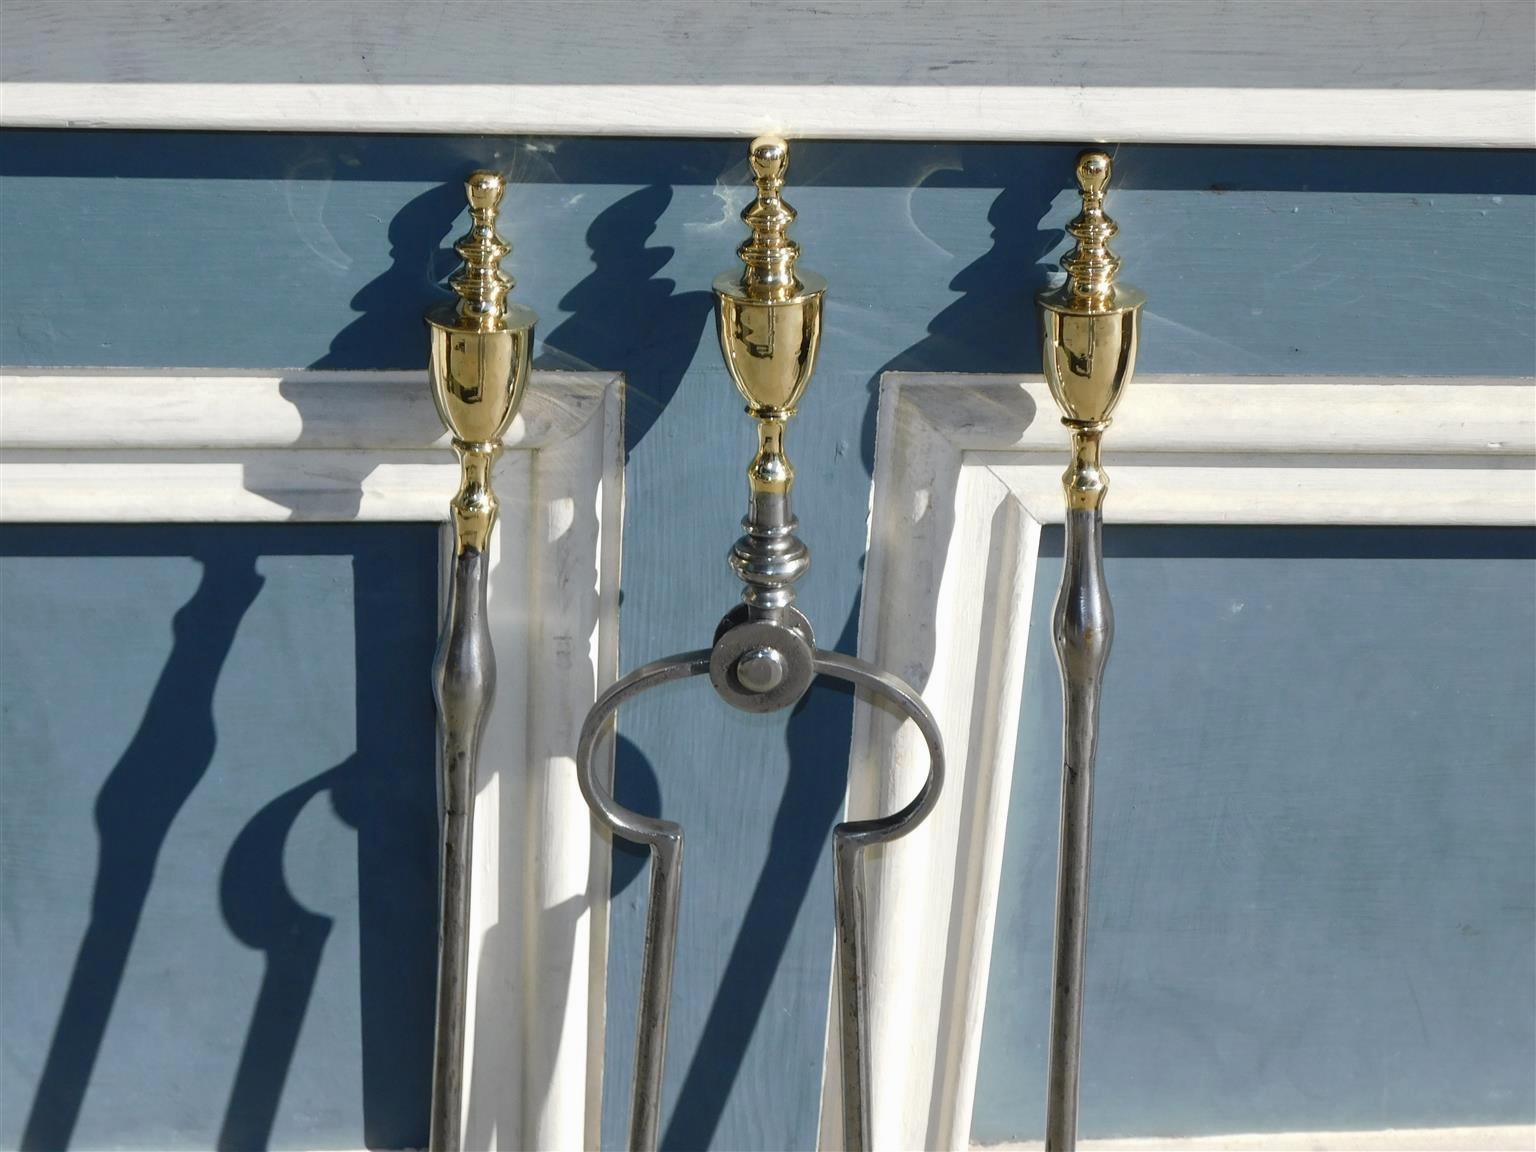 Cast Set of American Brass and Polished Steel Urn Finial Bulbous Fire Tools, C. 1810 For Sale